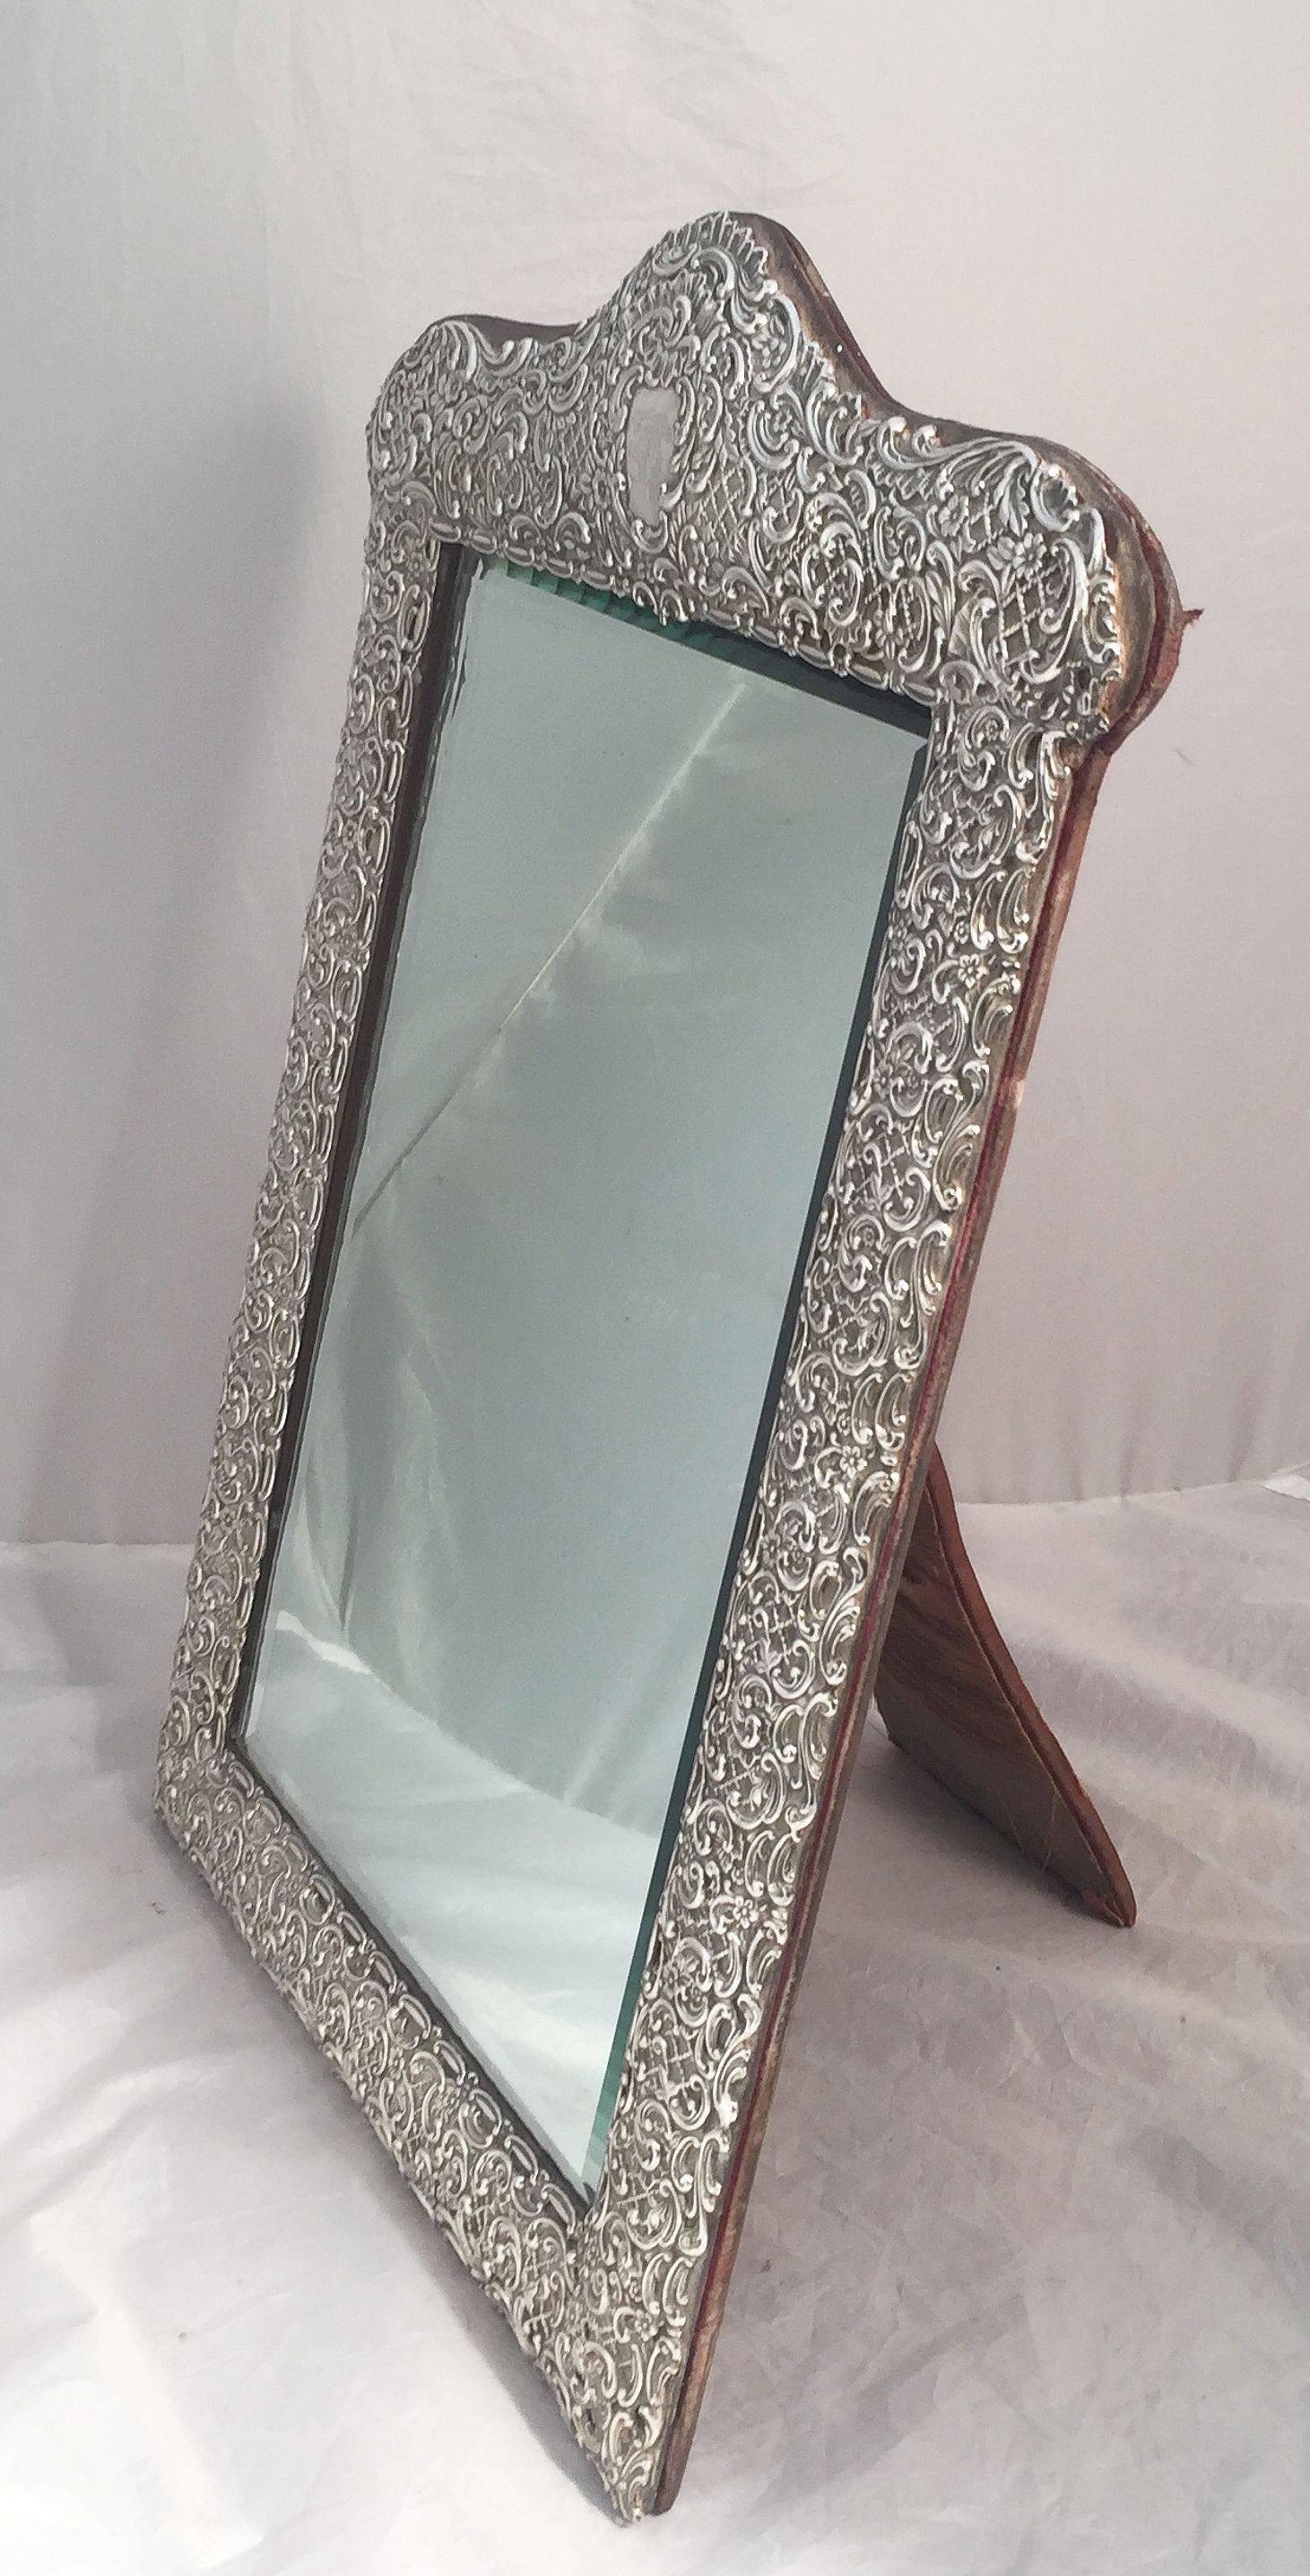 19th Century English Vanity or Table Mirror of Sterling Silver, circa 1898